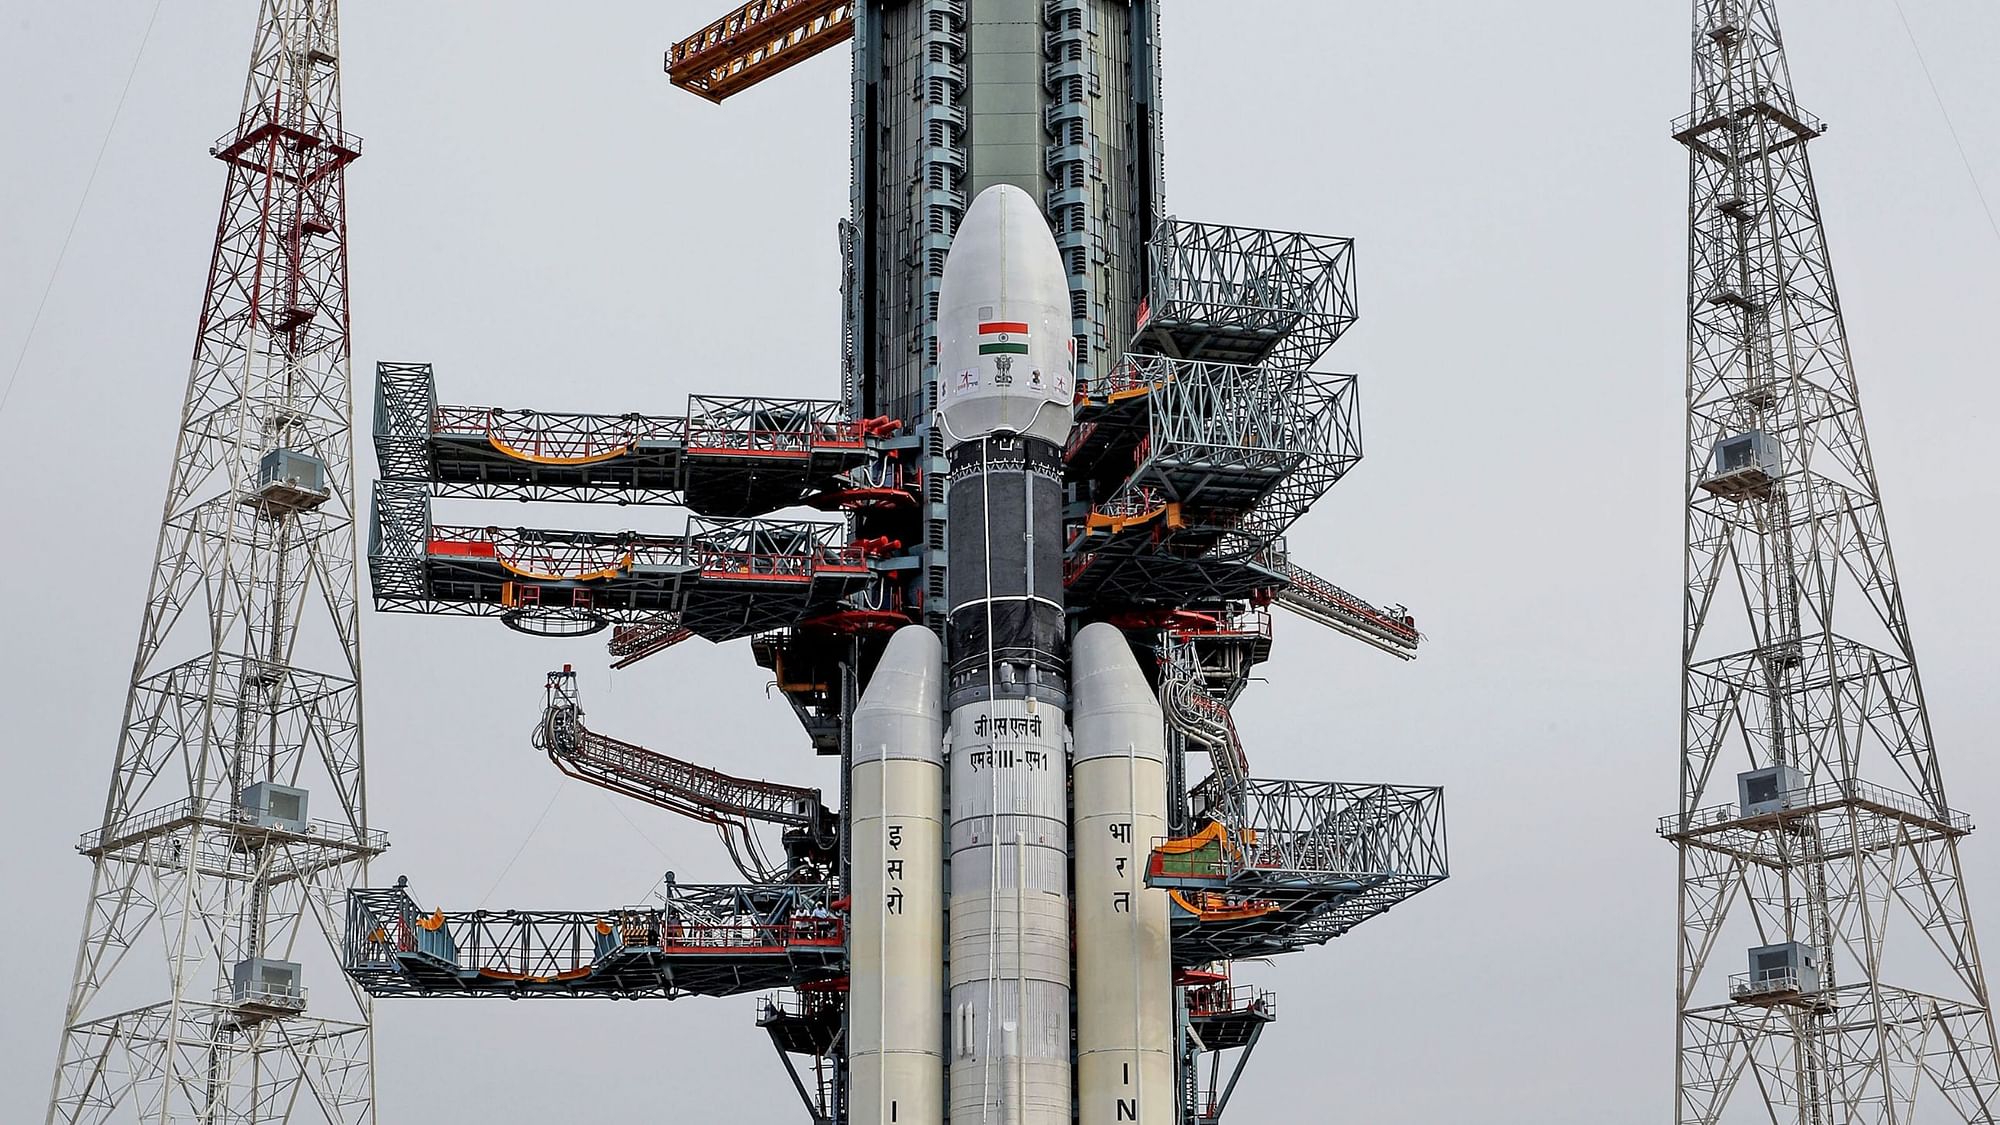 ISRO’s GSLV Mk-III launch vehicle rests at the Satish Dhawan Space Centre in Sriharikota. The GSLV Mk III will carry Chandrayaan 2, India’s second moon mission.